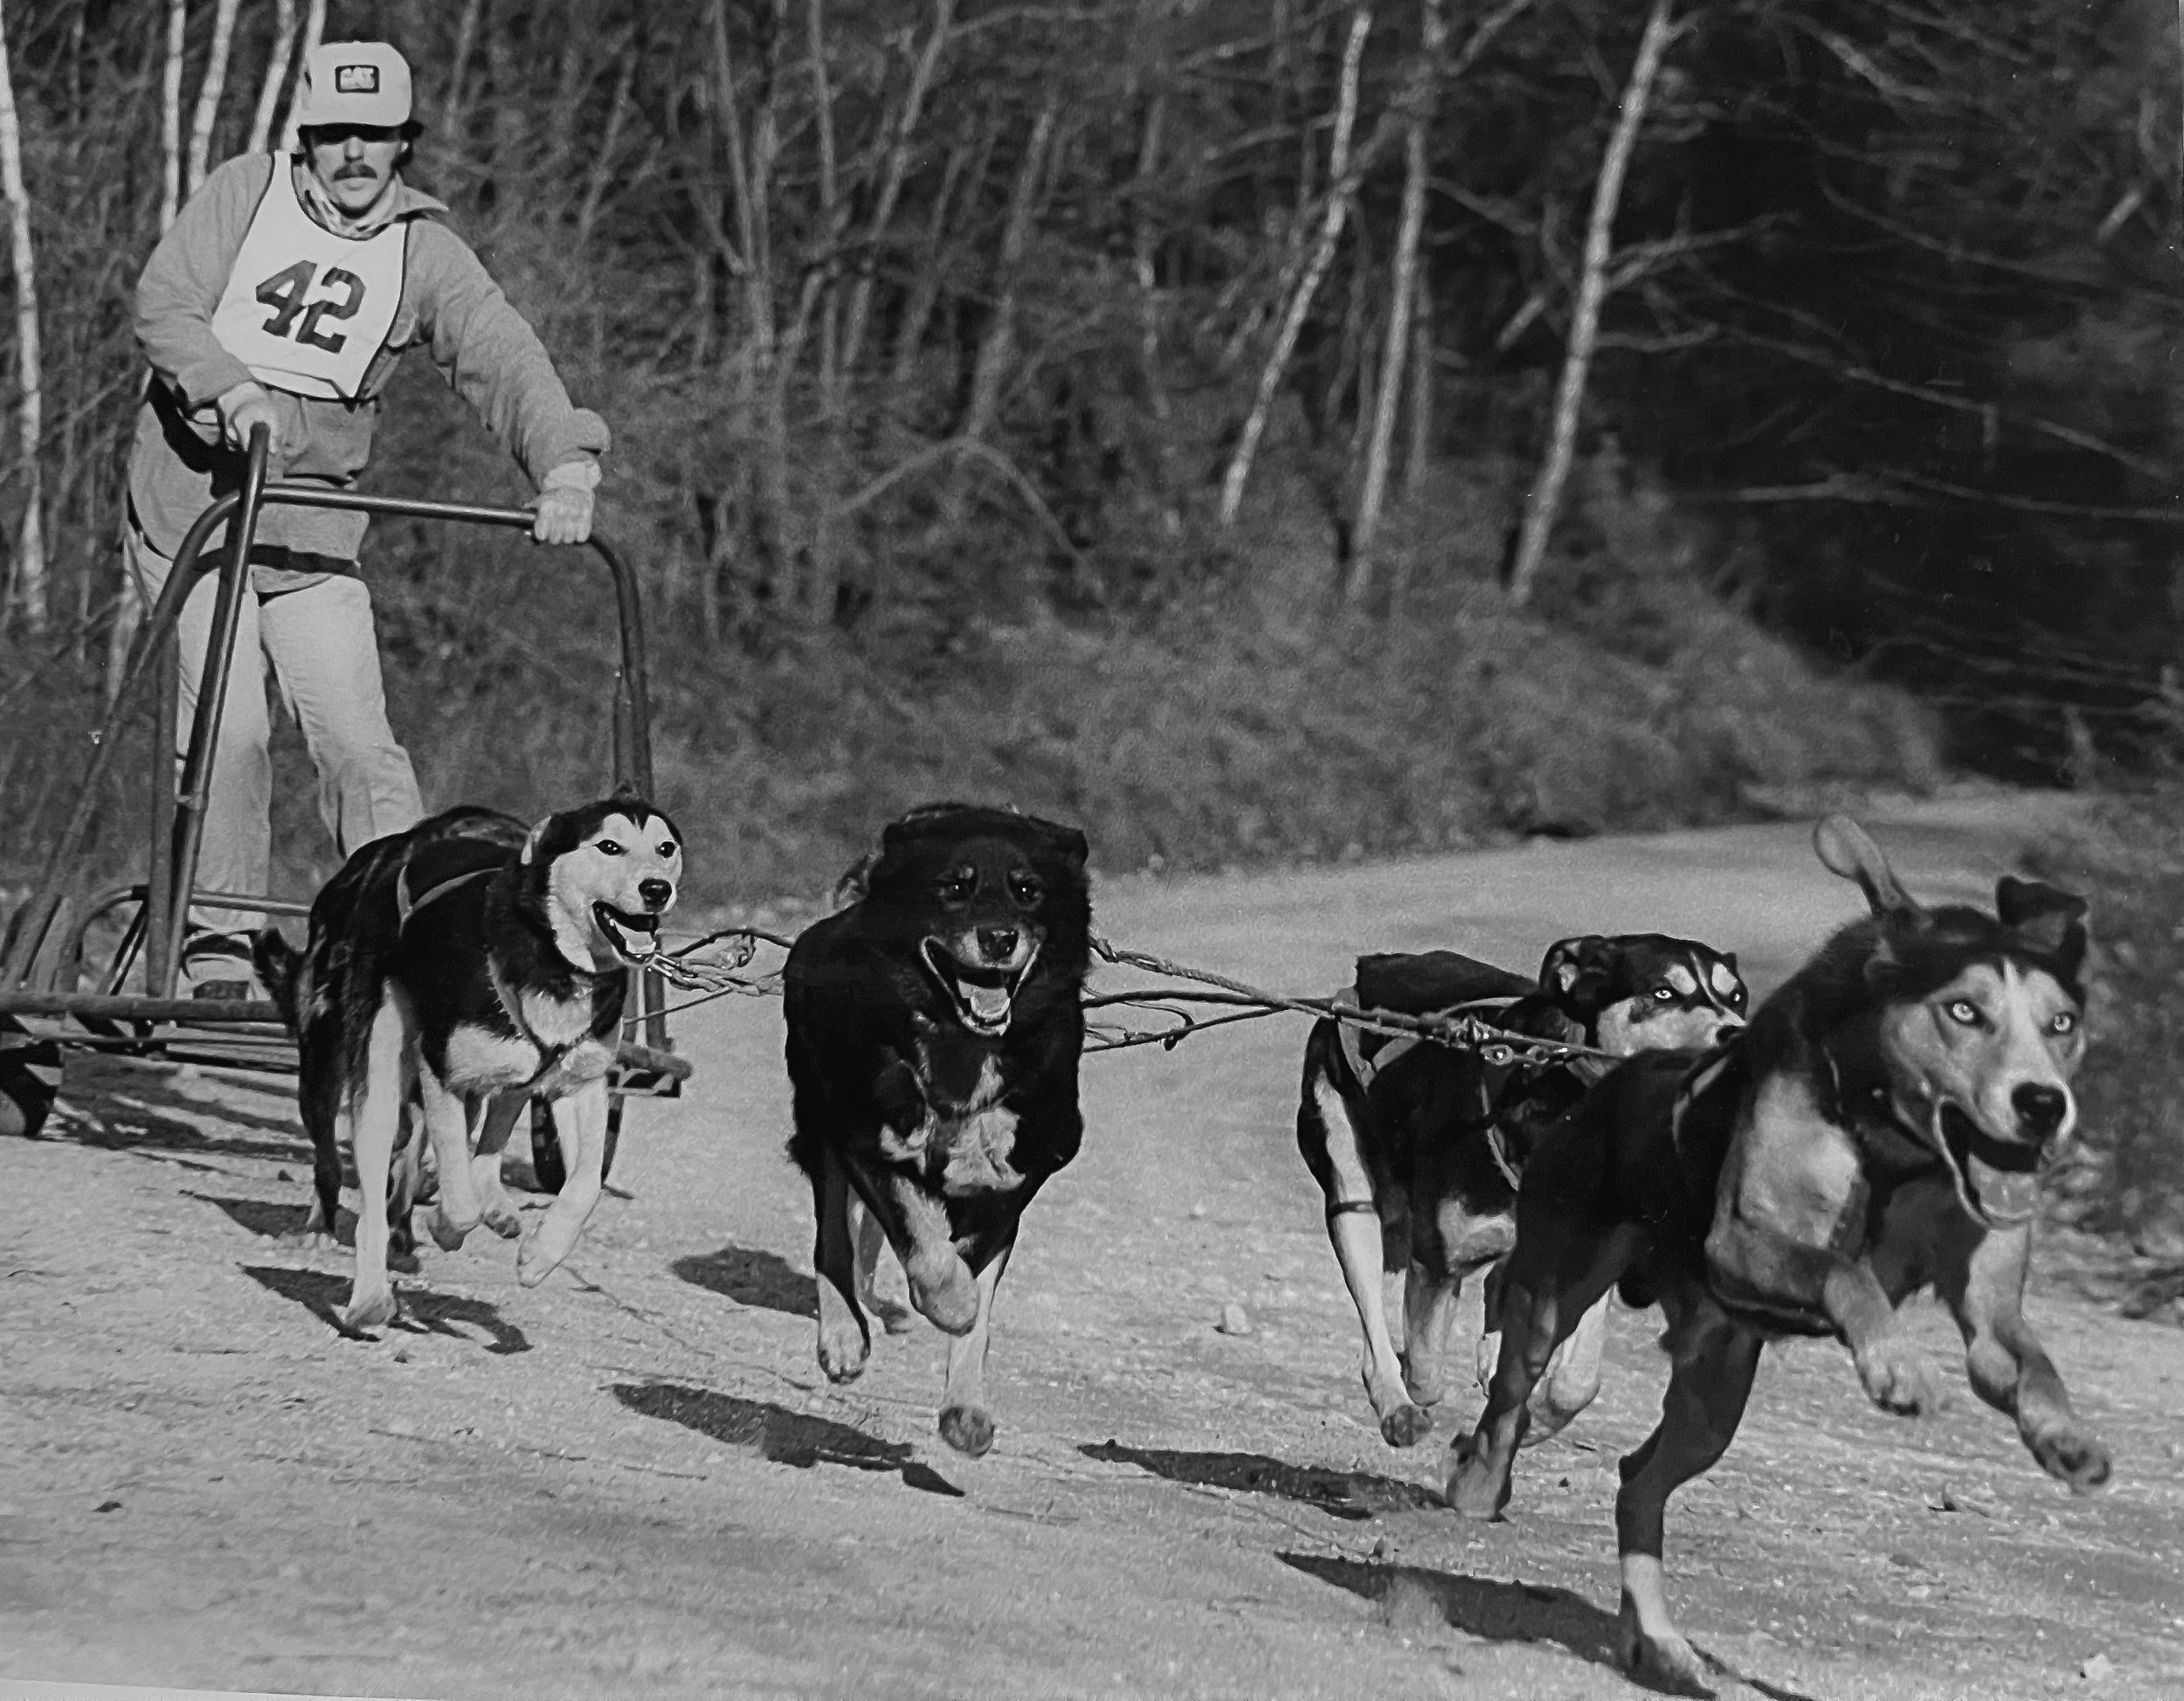   Surprise !   From 1971 until 1986 I raised and raced sled dogs all around the Northeastern US.  Here I am training a 6 dog team in a race with training rigs in Royalston MA in the early 1980’s.  